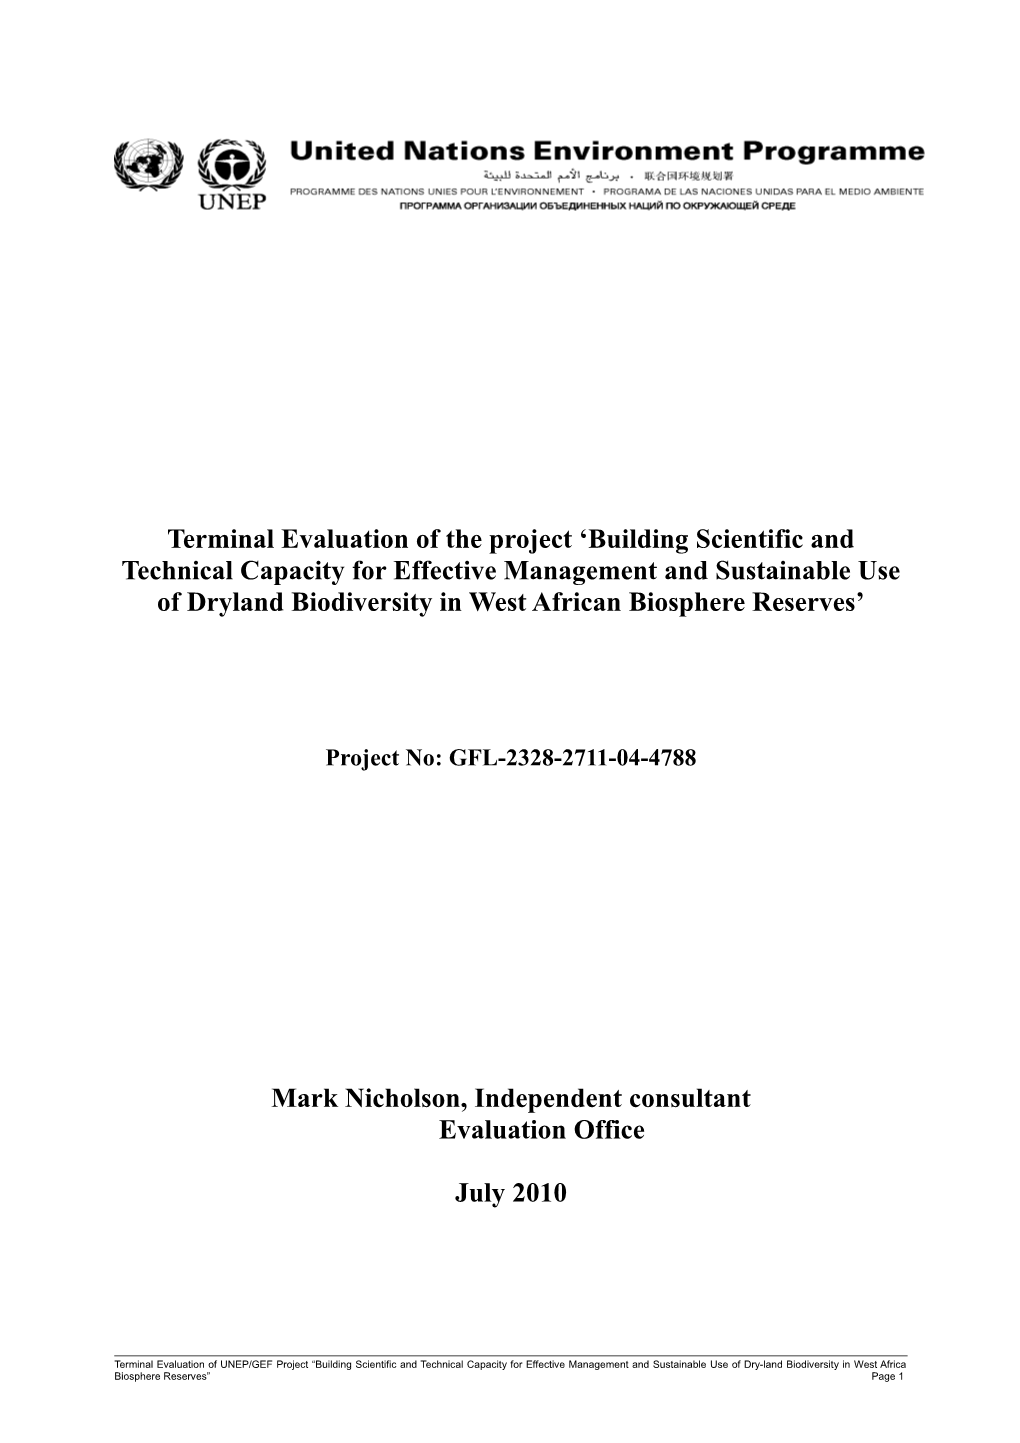 Terminal Evaluation of the Project Building Scientific and Technical Capacity for Effective